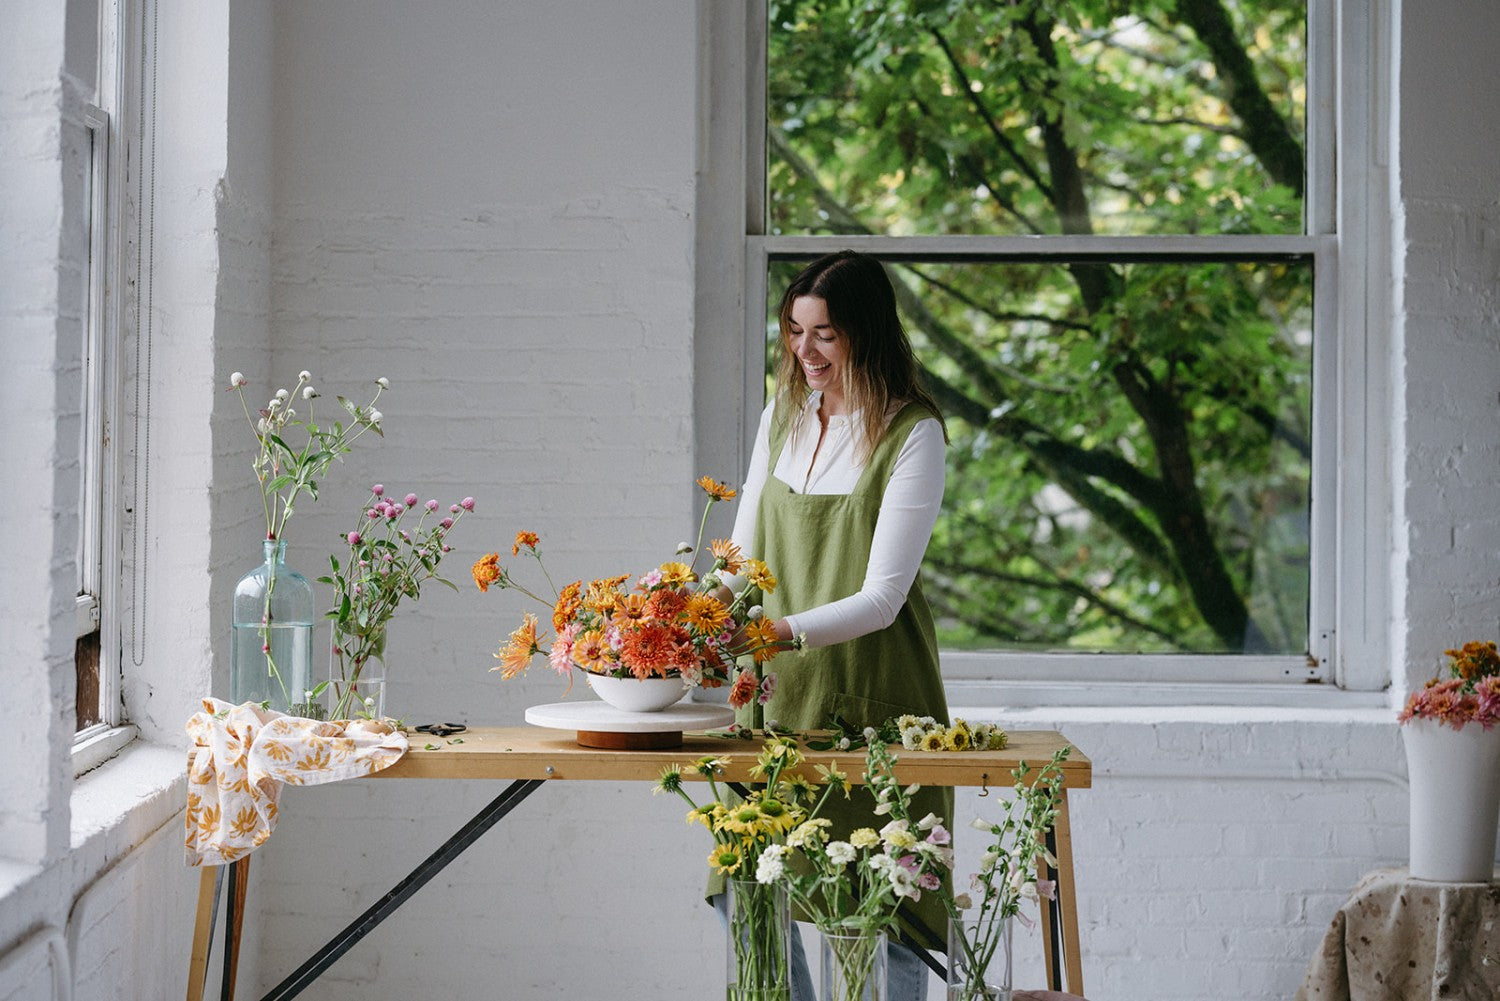 Woman arranging flowers on table